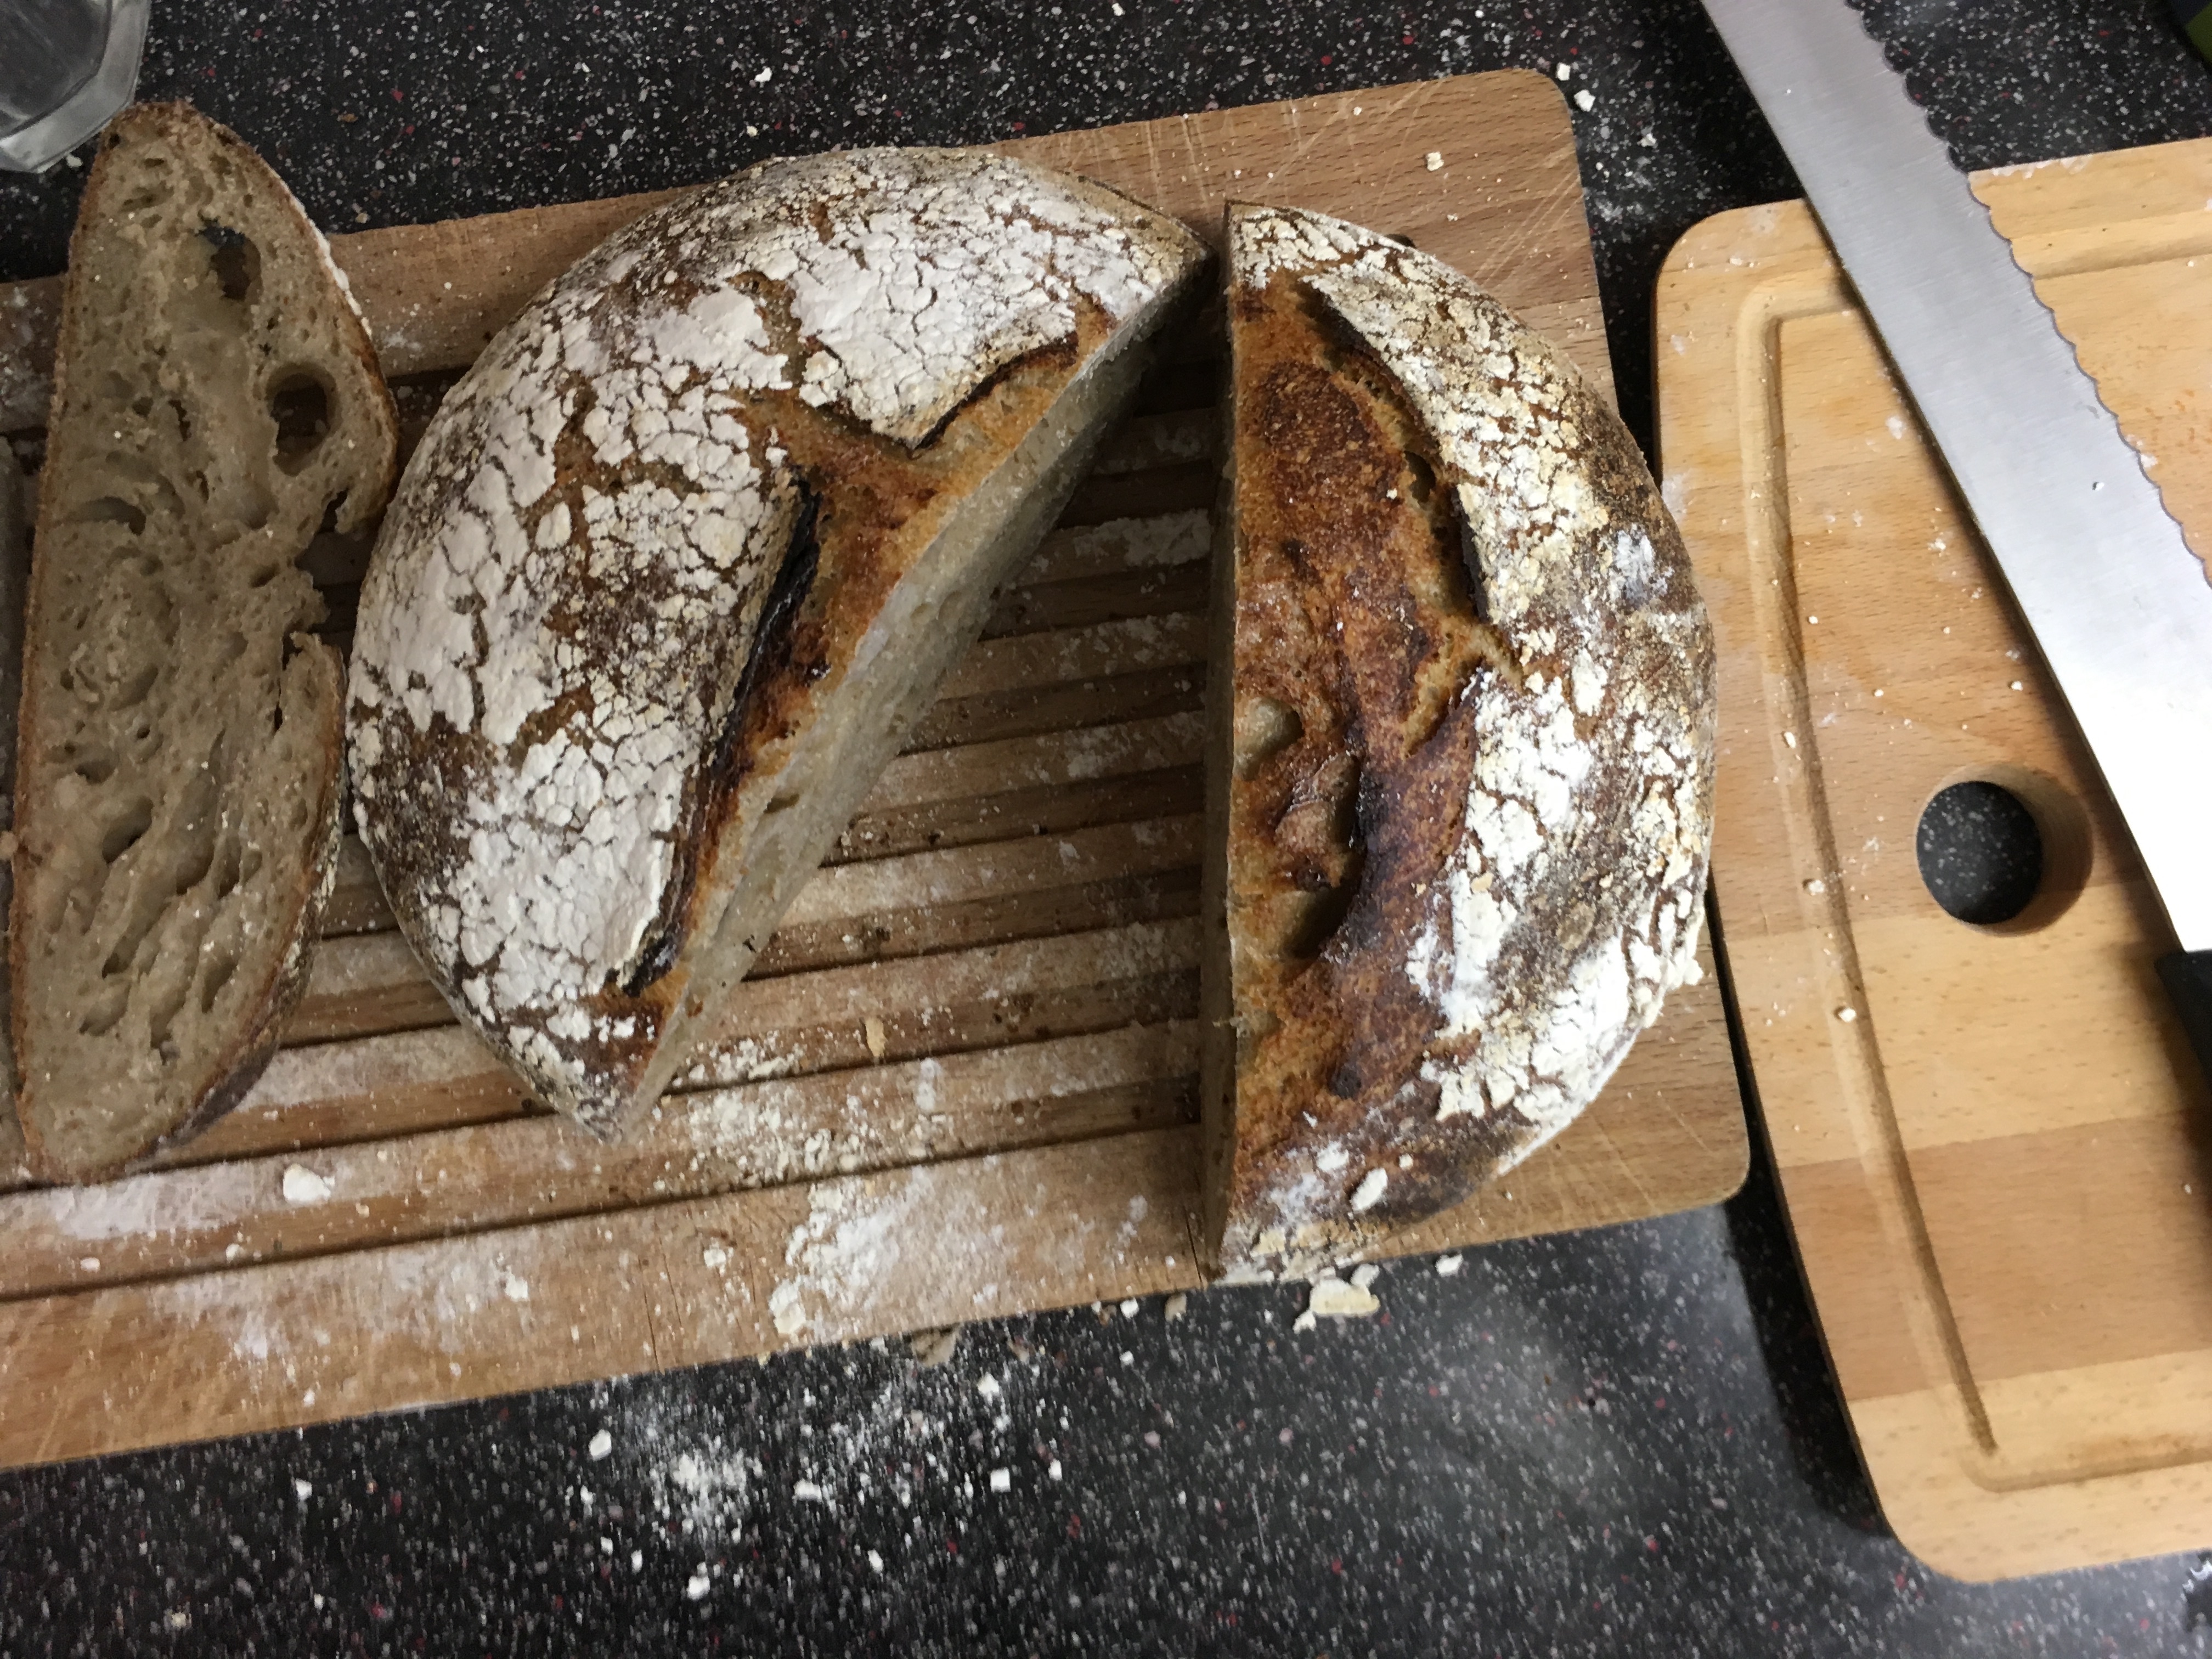 An image of a bread called “First Country Rye (Tartine)”